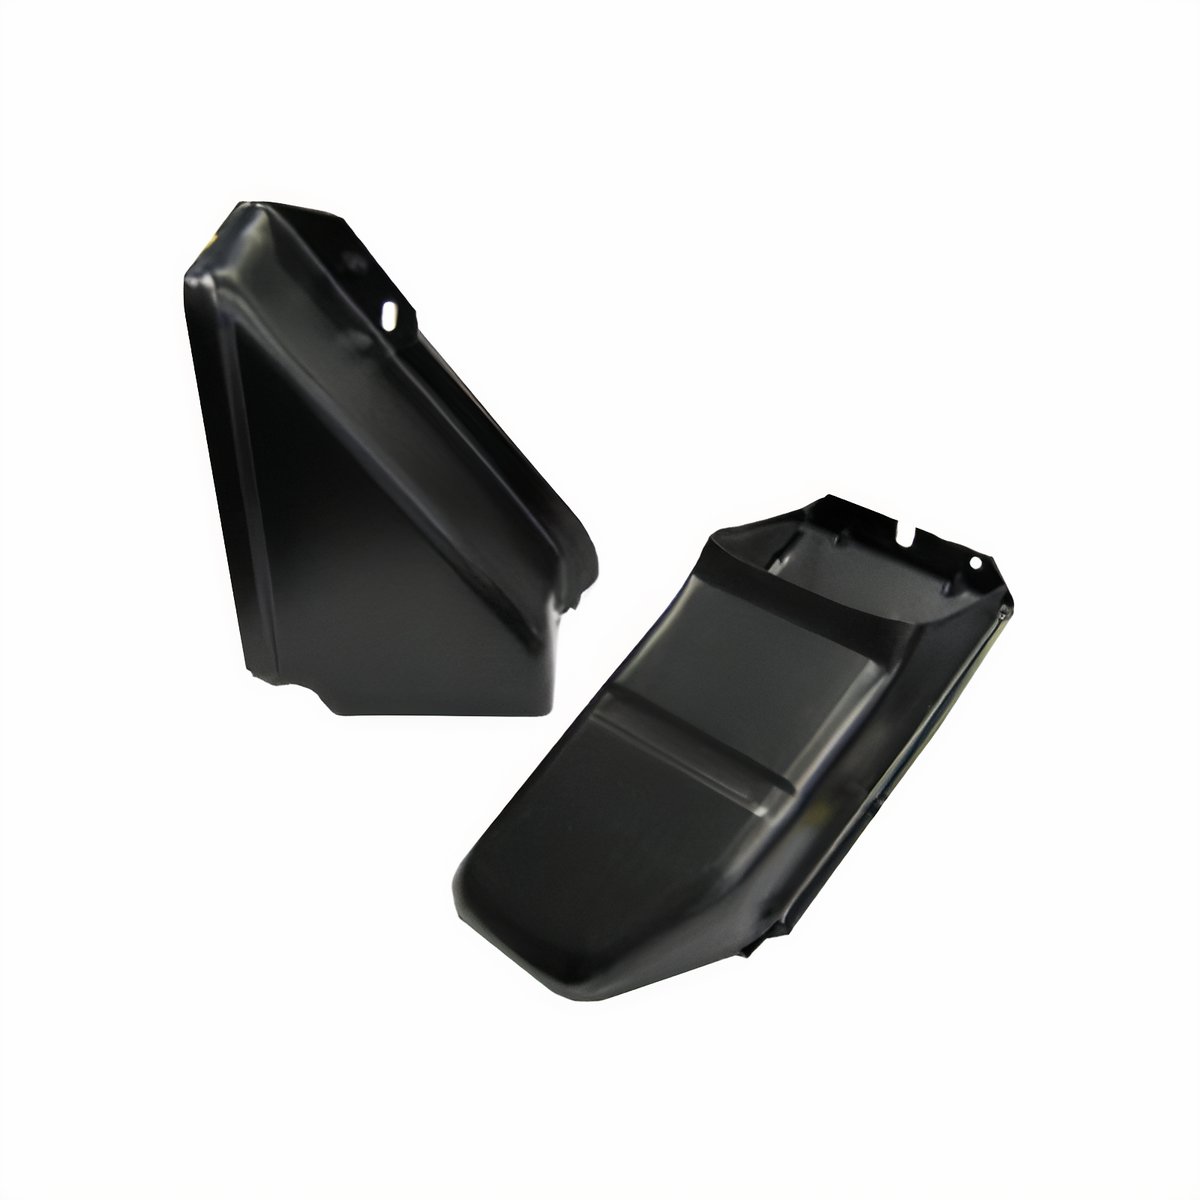 VW Doghouse Tin - Black - Attaches to Fan Shroud - 2 Pieces